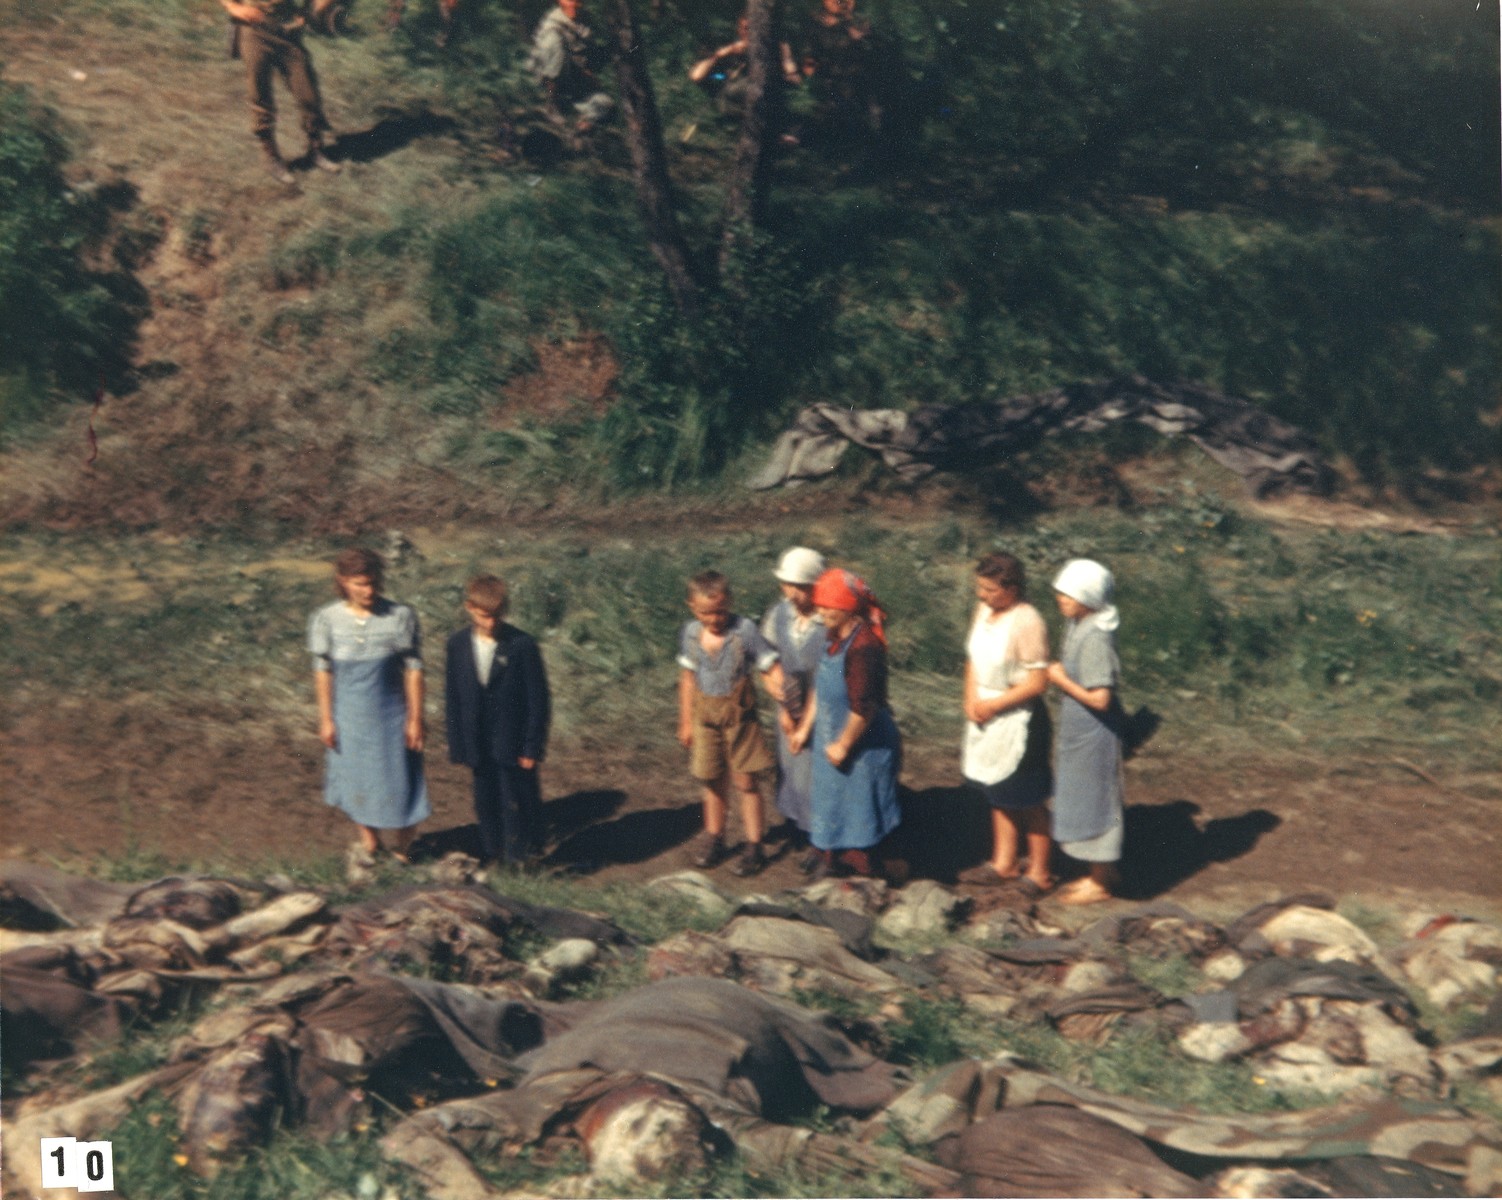 German civilians walk among the corpses of prisoners exhumed from a mass grave near the town of Nammering.